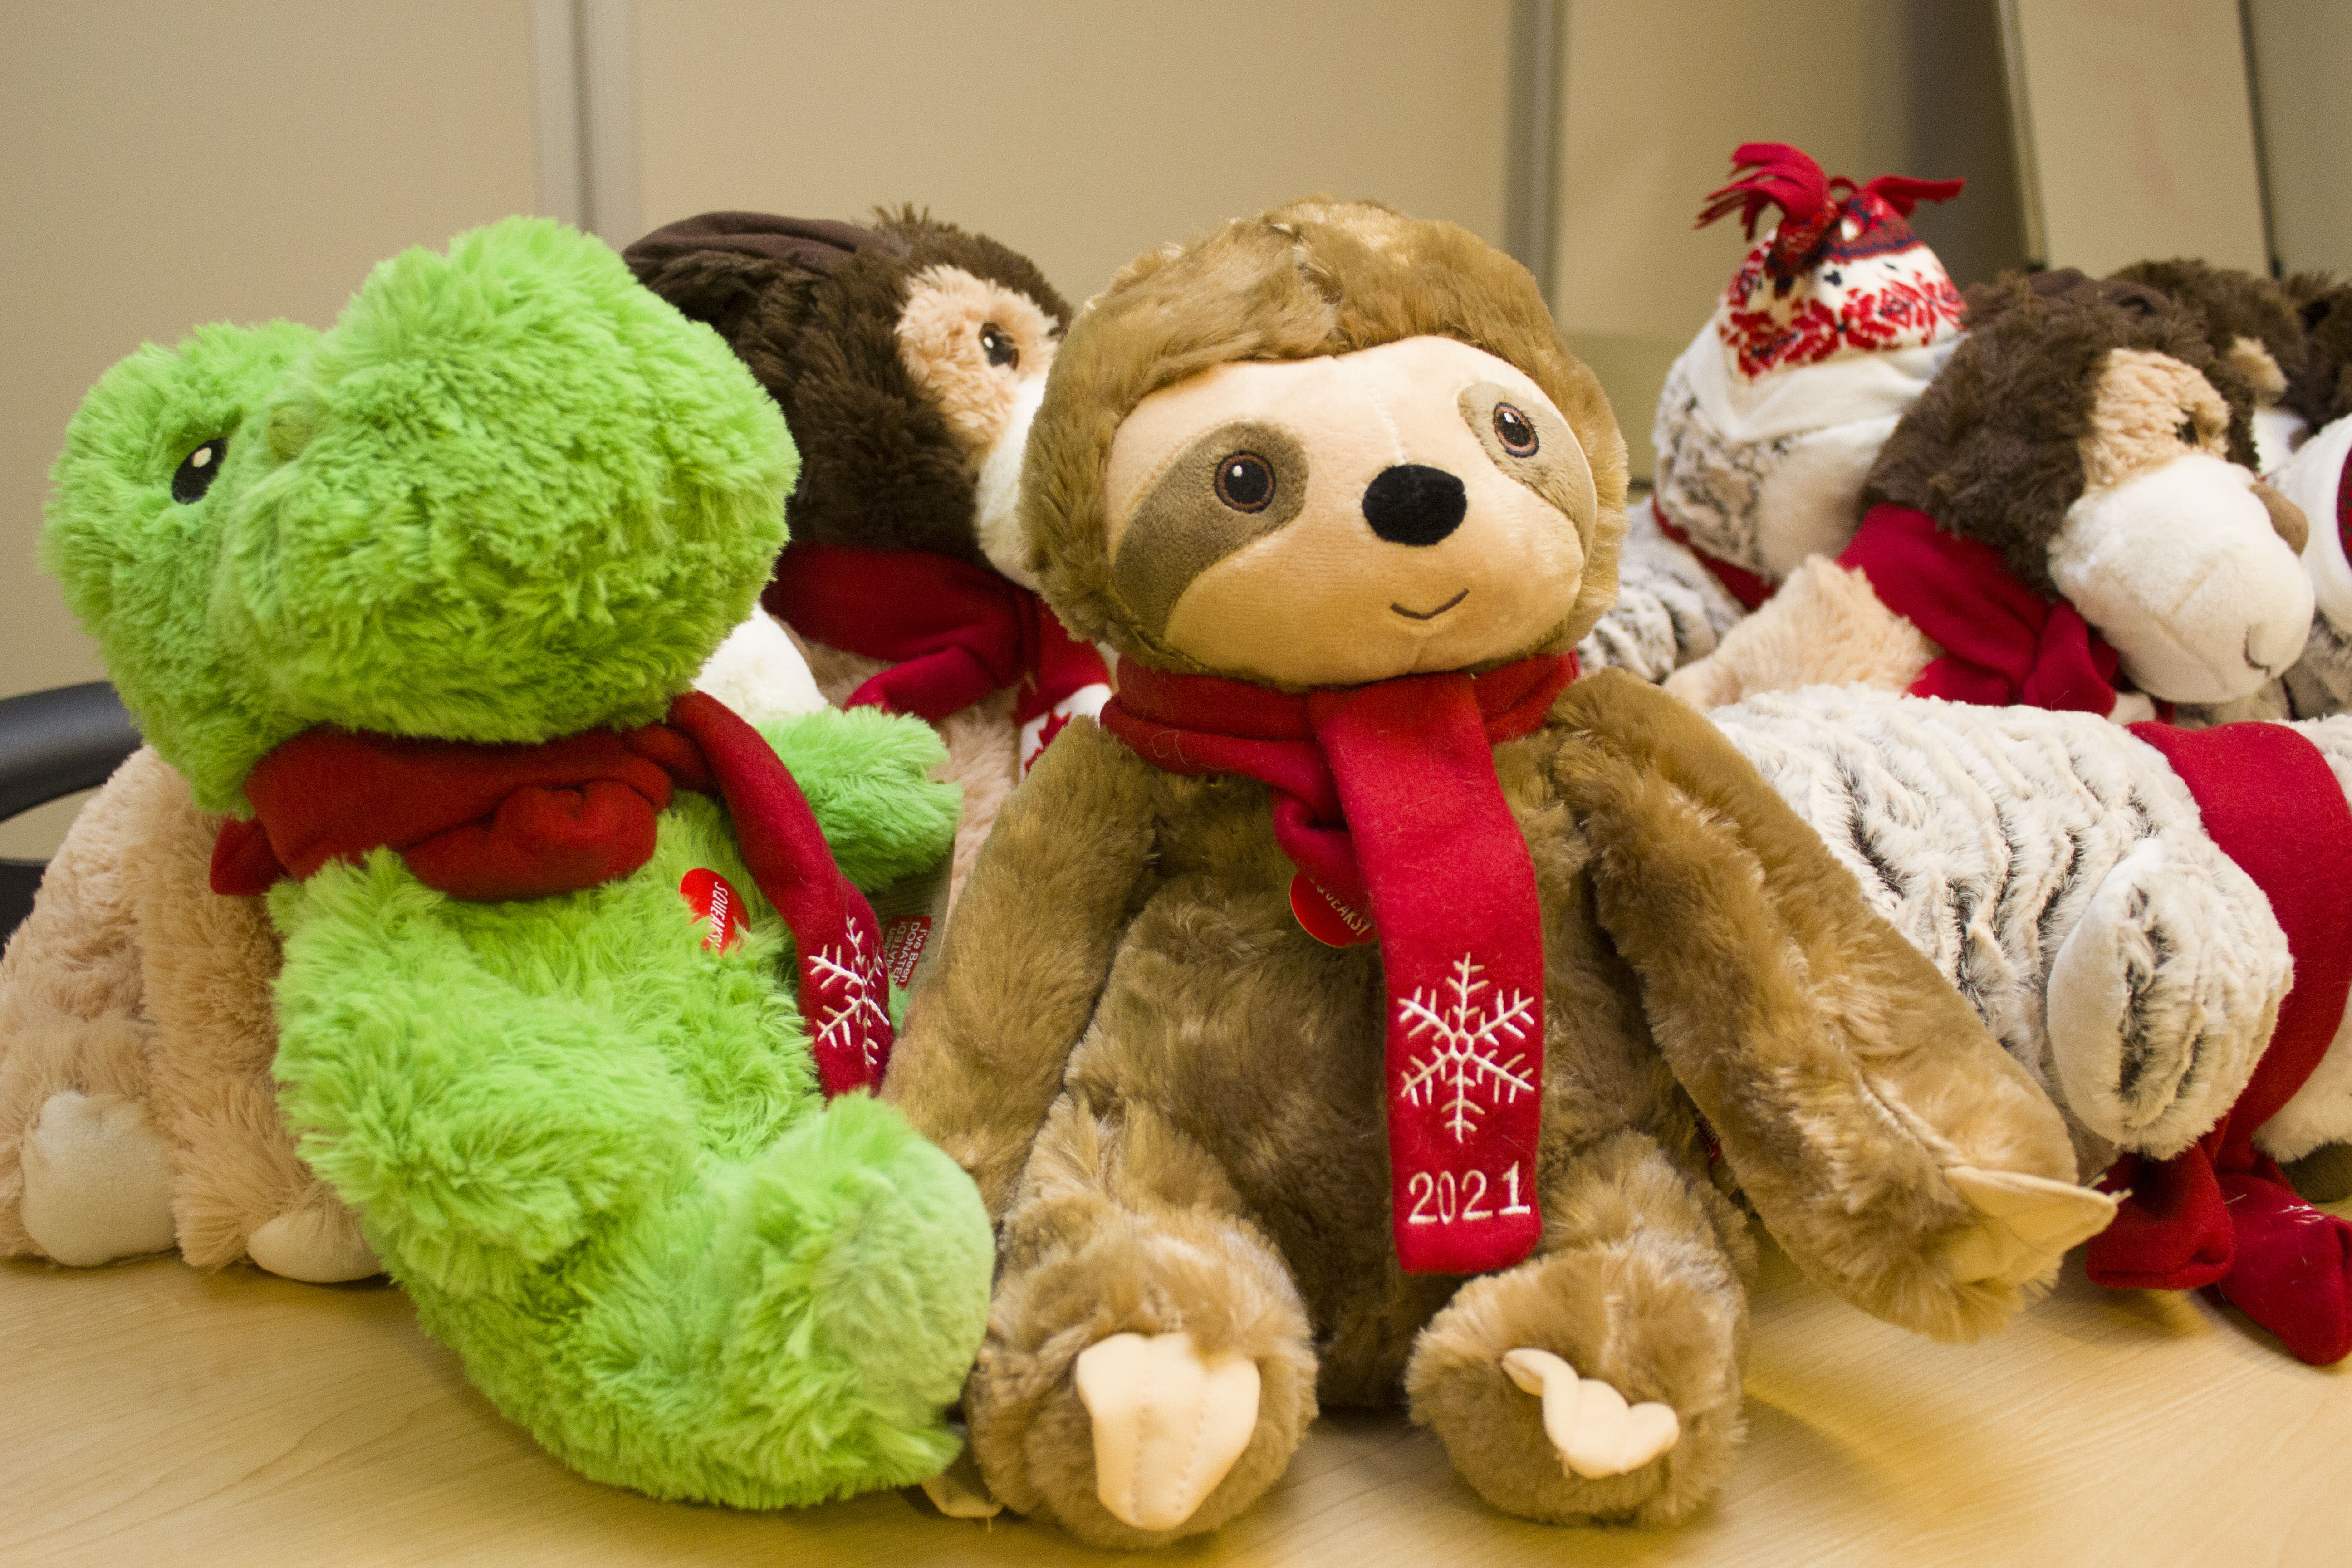 More than one hundred teddy bears delivered to Children’s Unit at Niagara Health